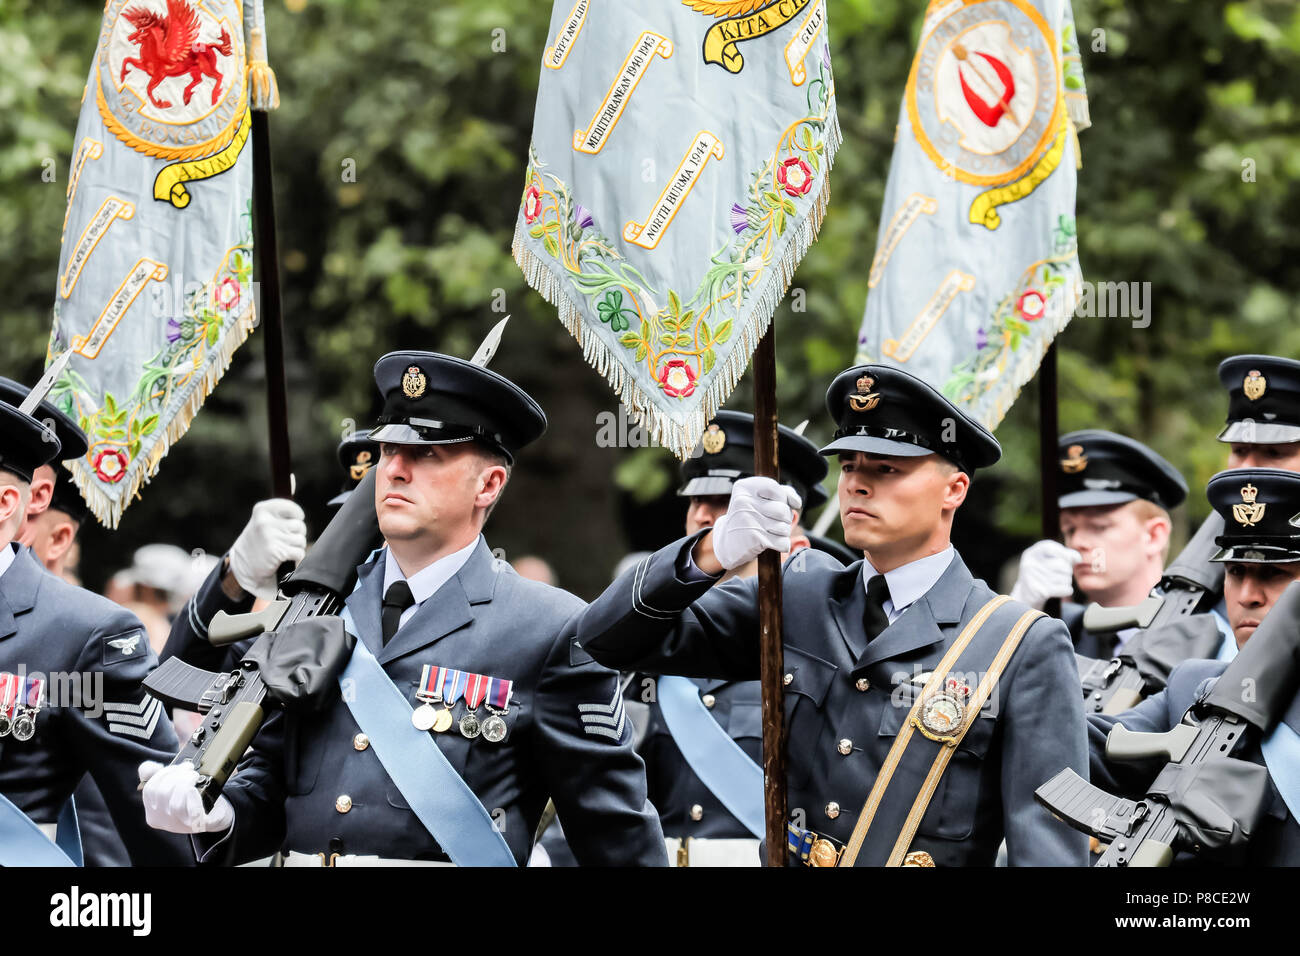 London, UK. 10th July 2018. RAF 100. Parade to celebrate the centenary of the Royal Air Force Credit: amanda rose/Alamy Live News Stock Photo